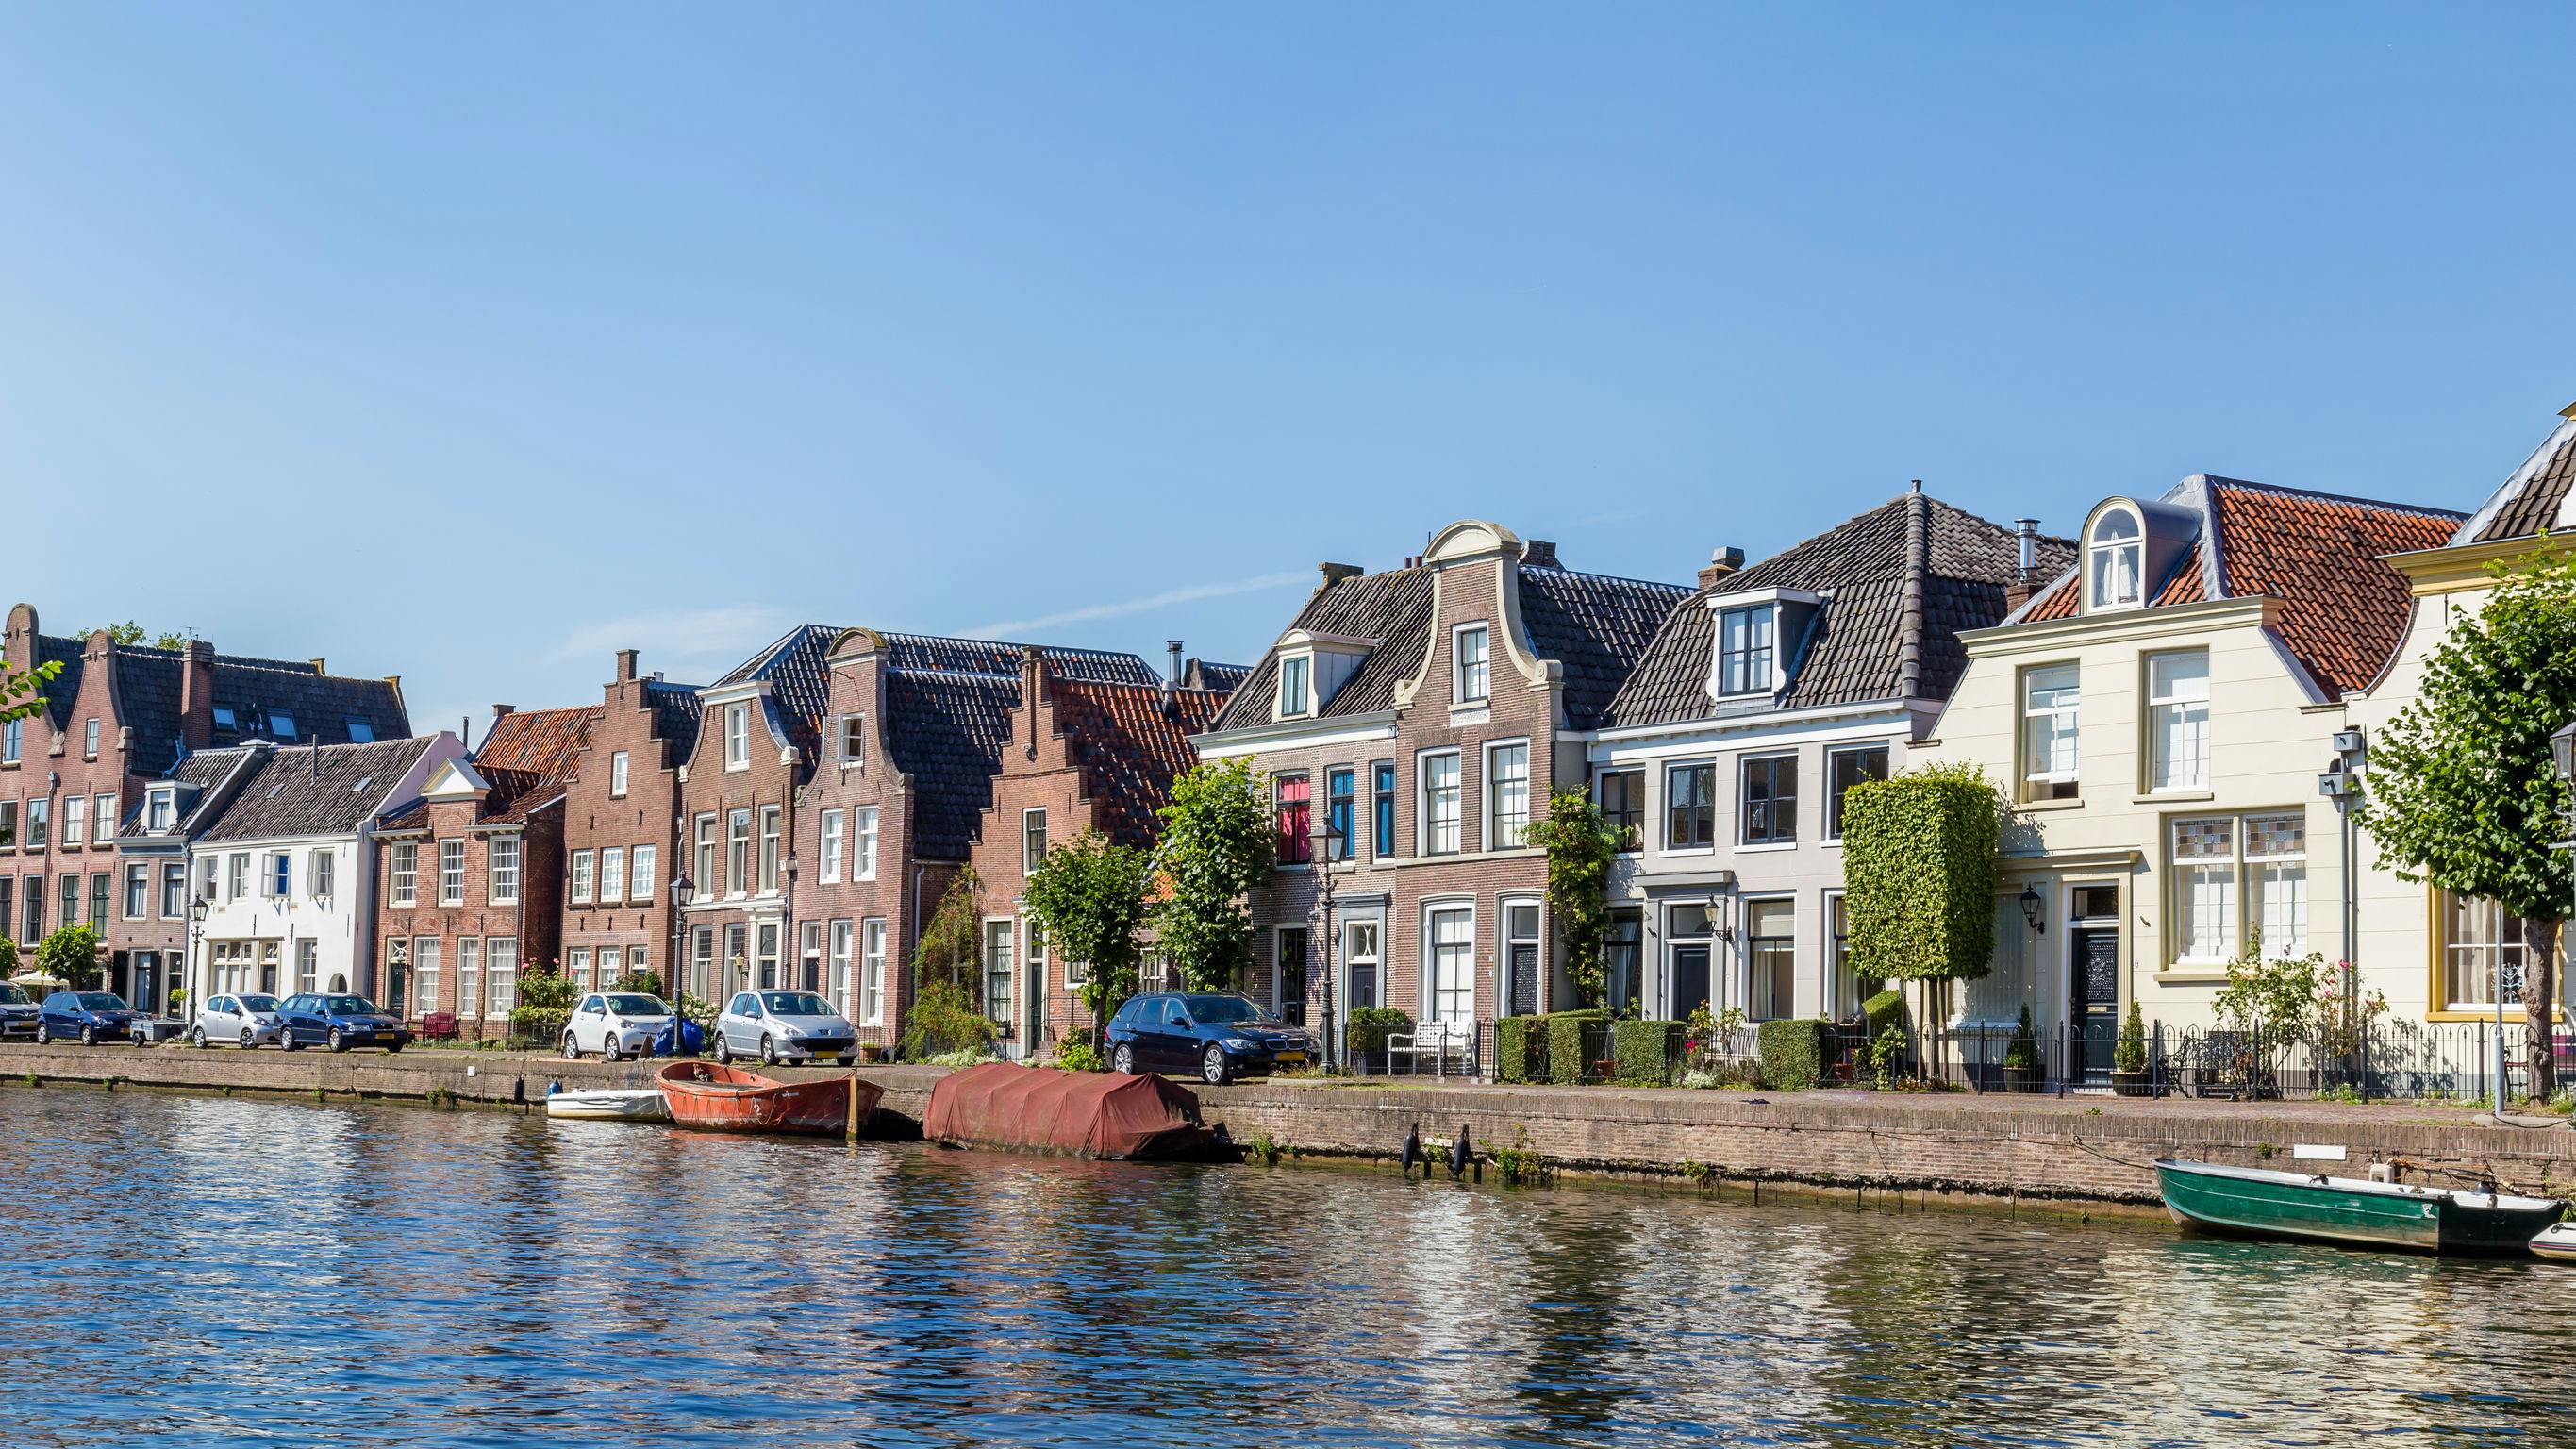 Private day tour and cruise with lunch on Vecht River from Amsterdam